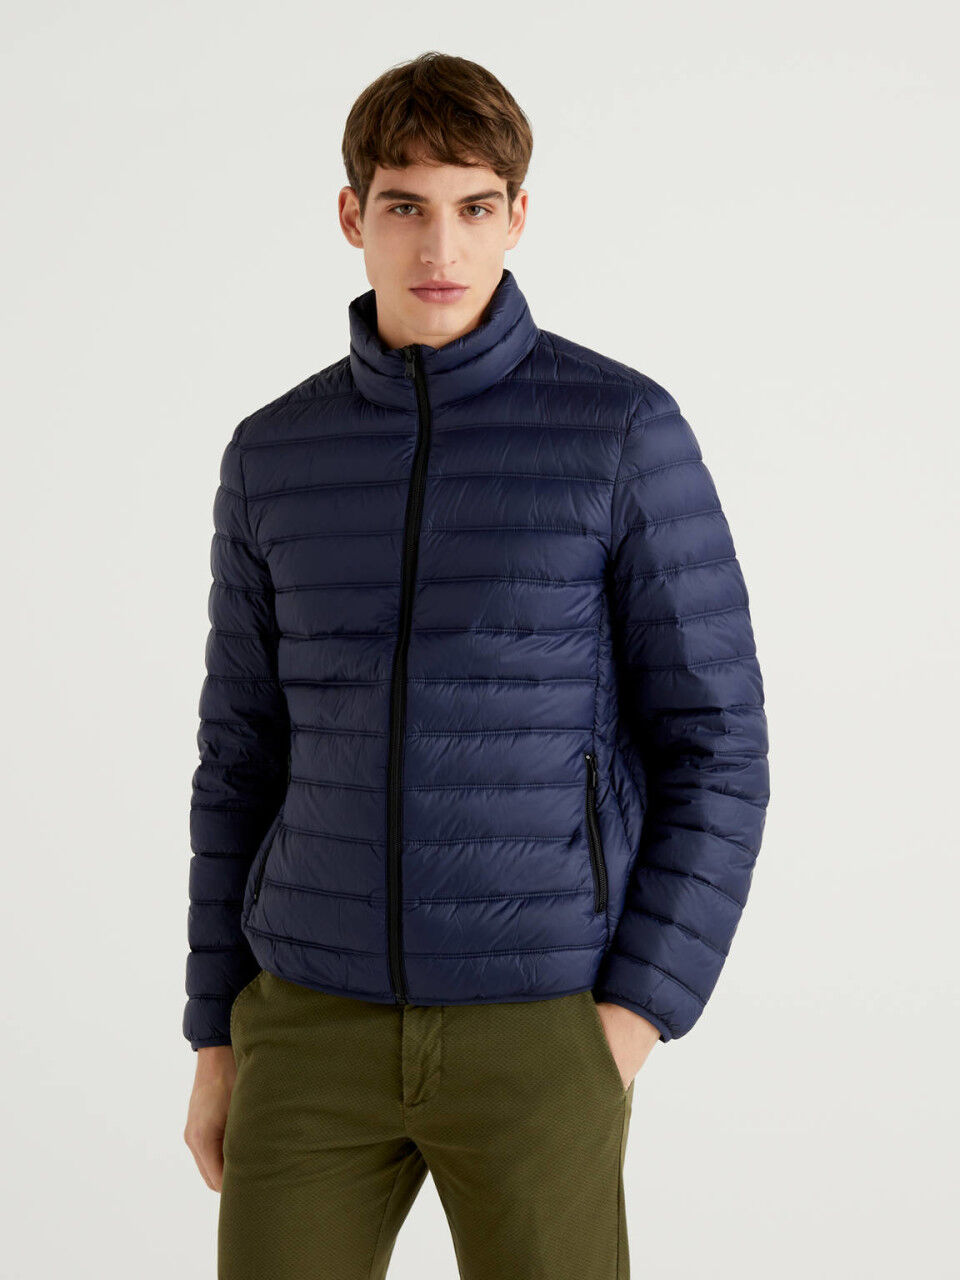 Men's Puffer Jackets New Collection 